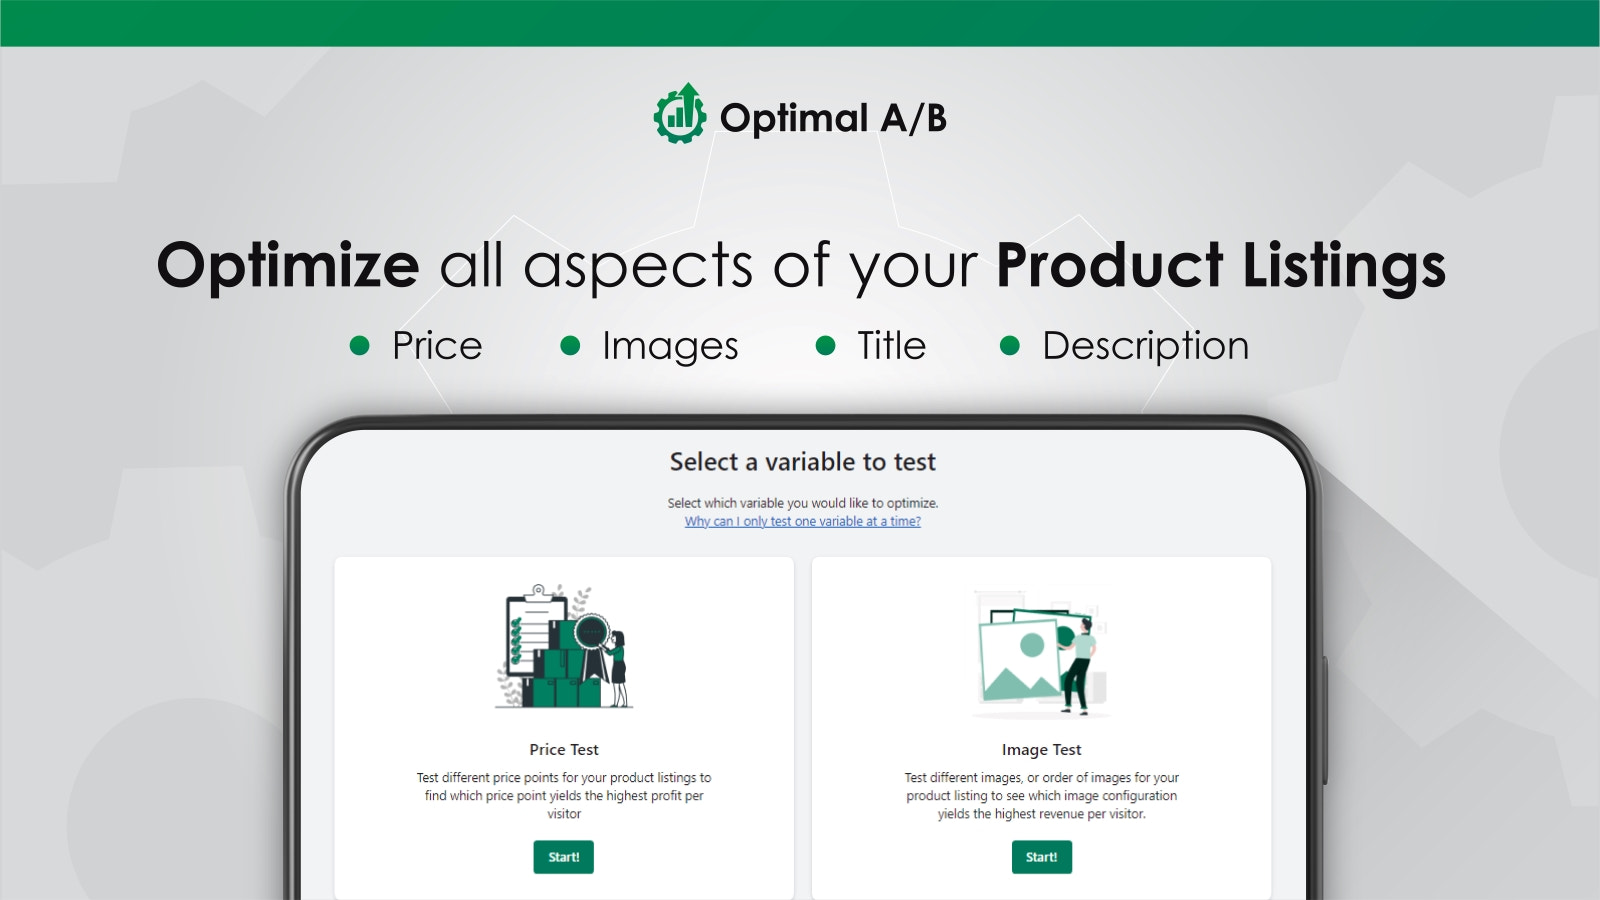 AB test price, images, title & description with Optimal A/B